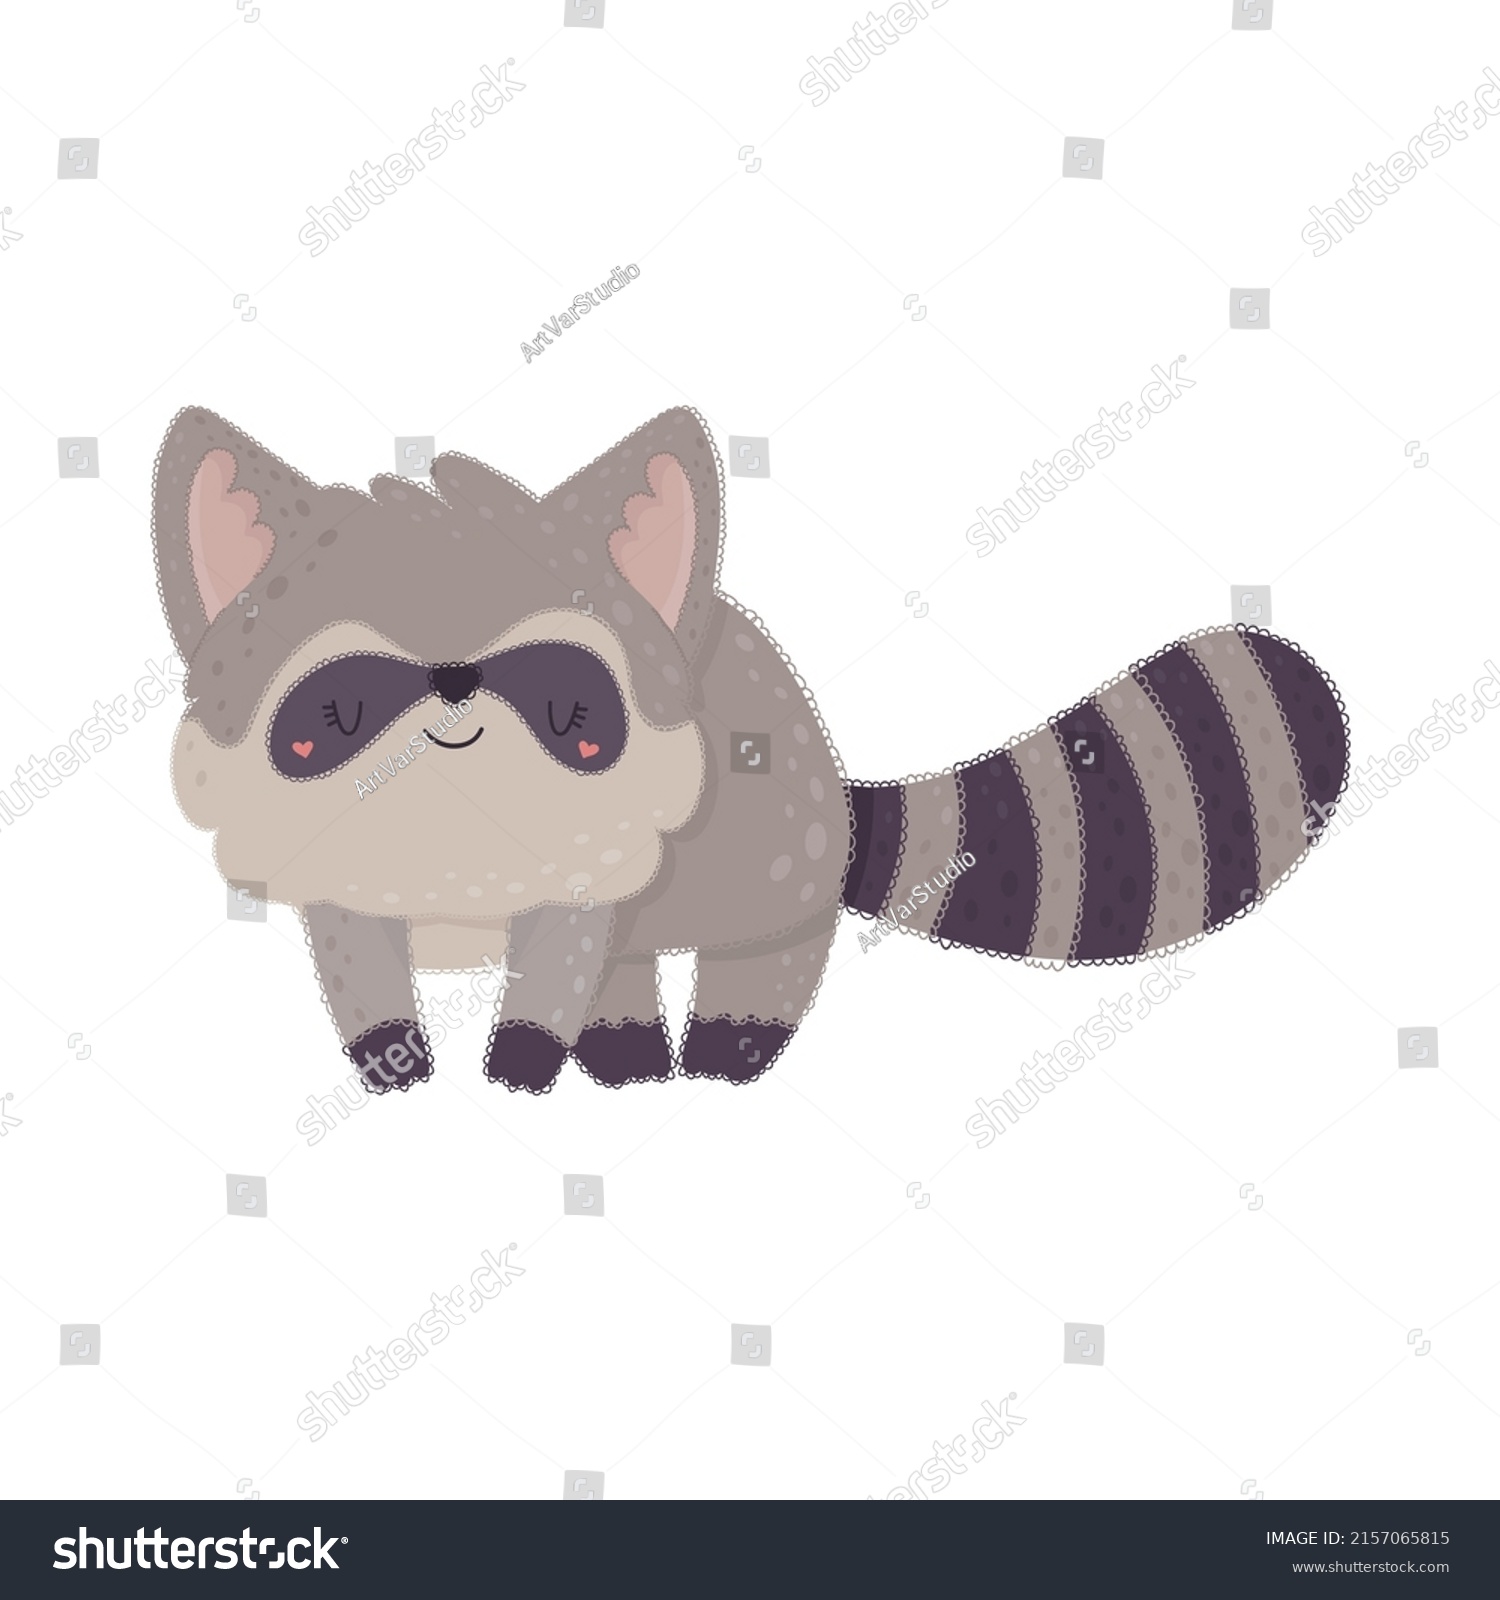 SVG of Funny cartoon raccoon. Vector illustration of a cute animal. Cute little illustration of racoon for kids, baby book, fairy tales, covers, baby shower invitation, textile t-shirt. svg